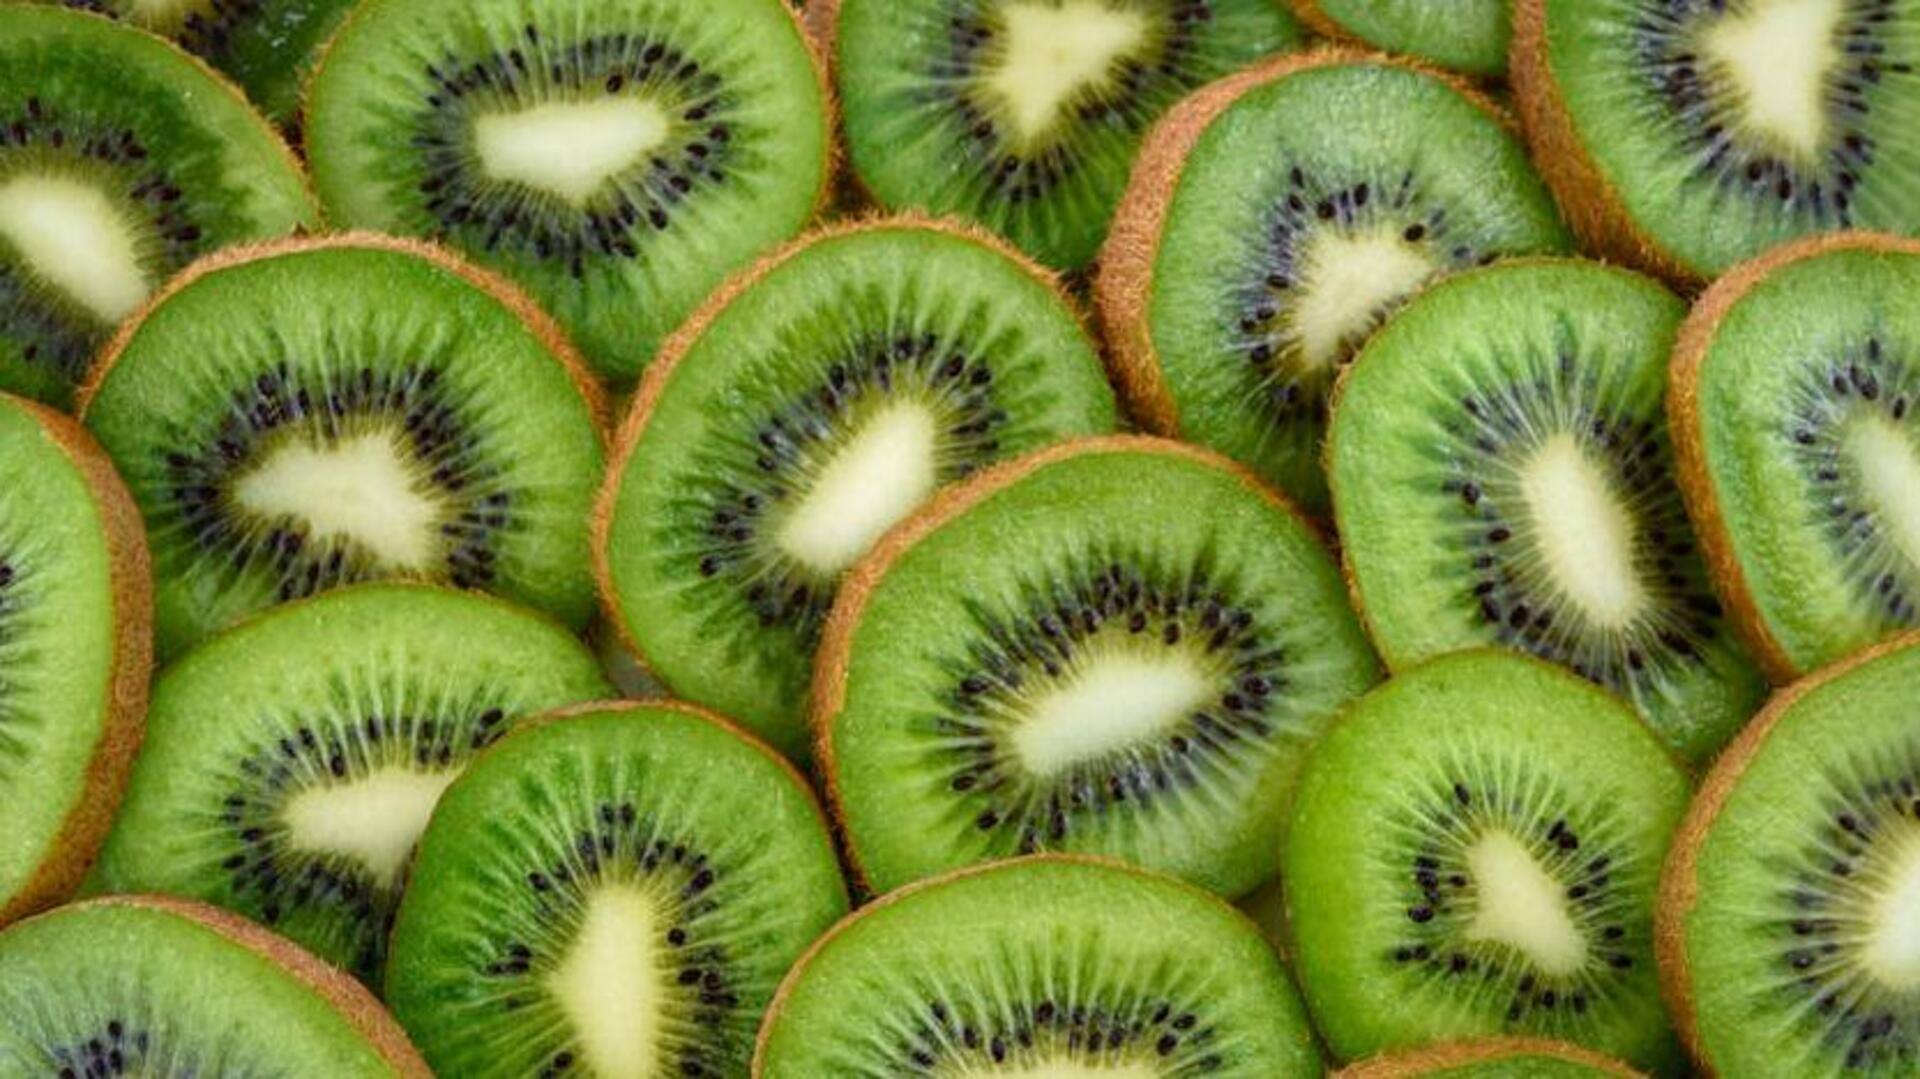 Gorge on these kiwi offerings packed with vitamin C